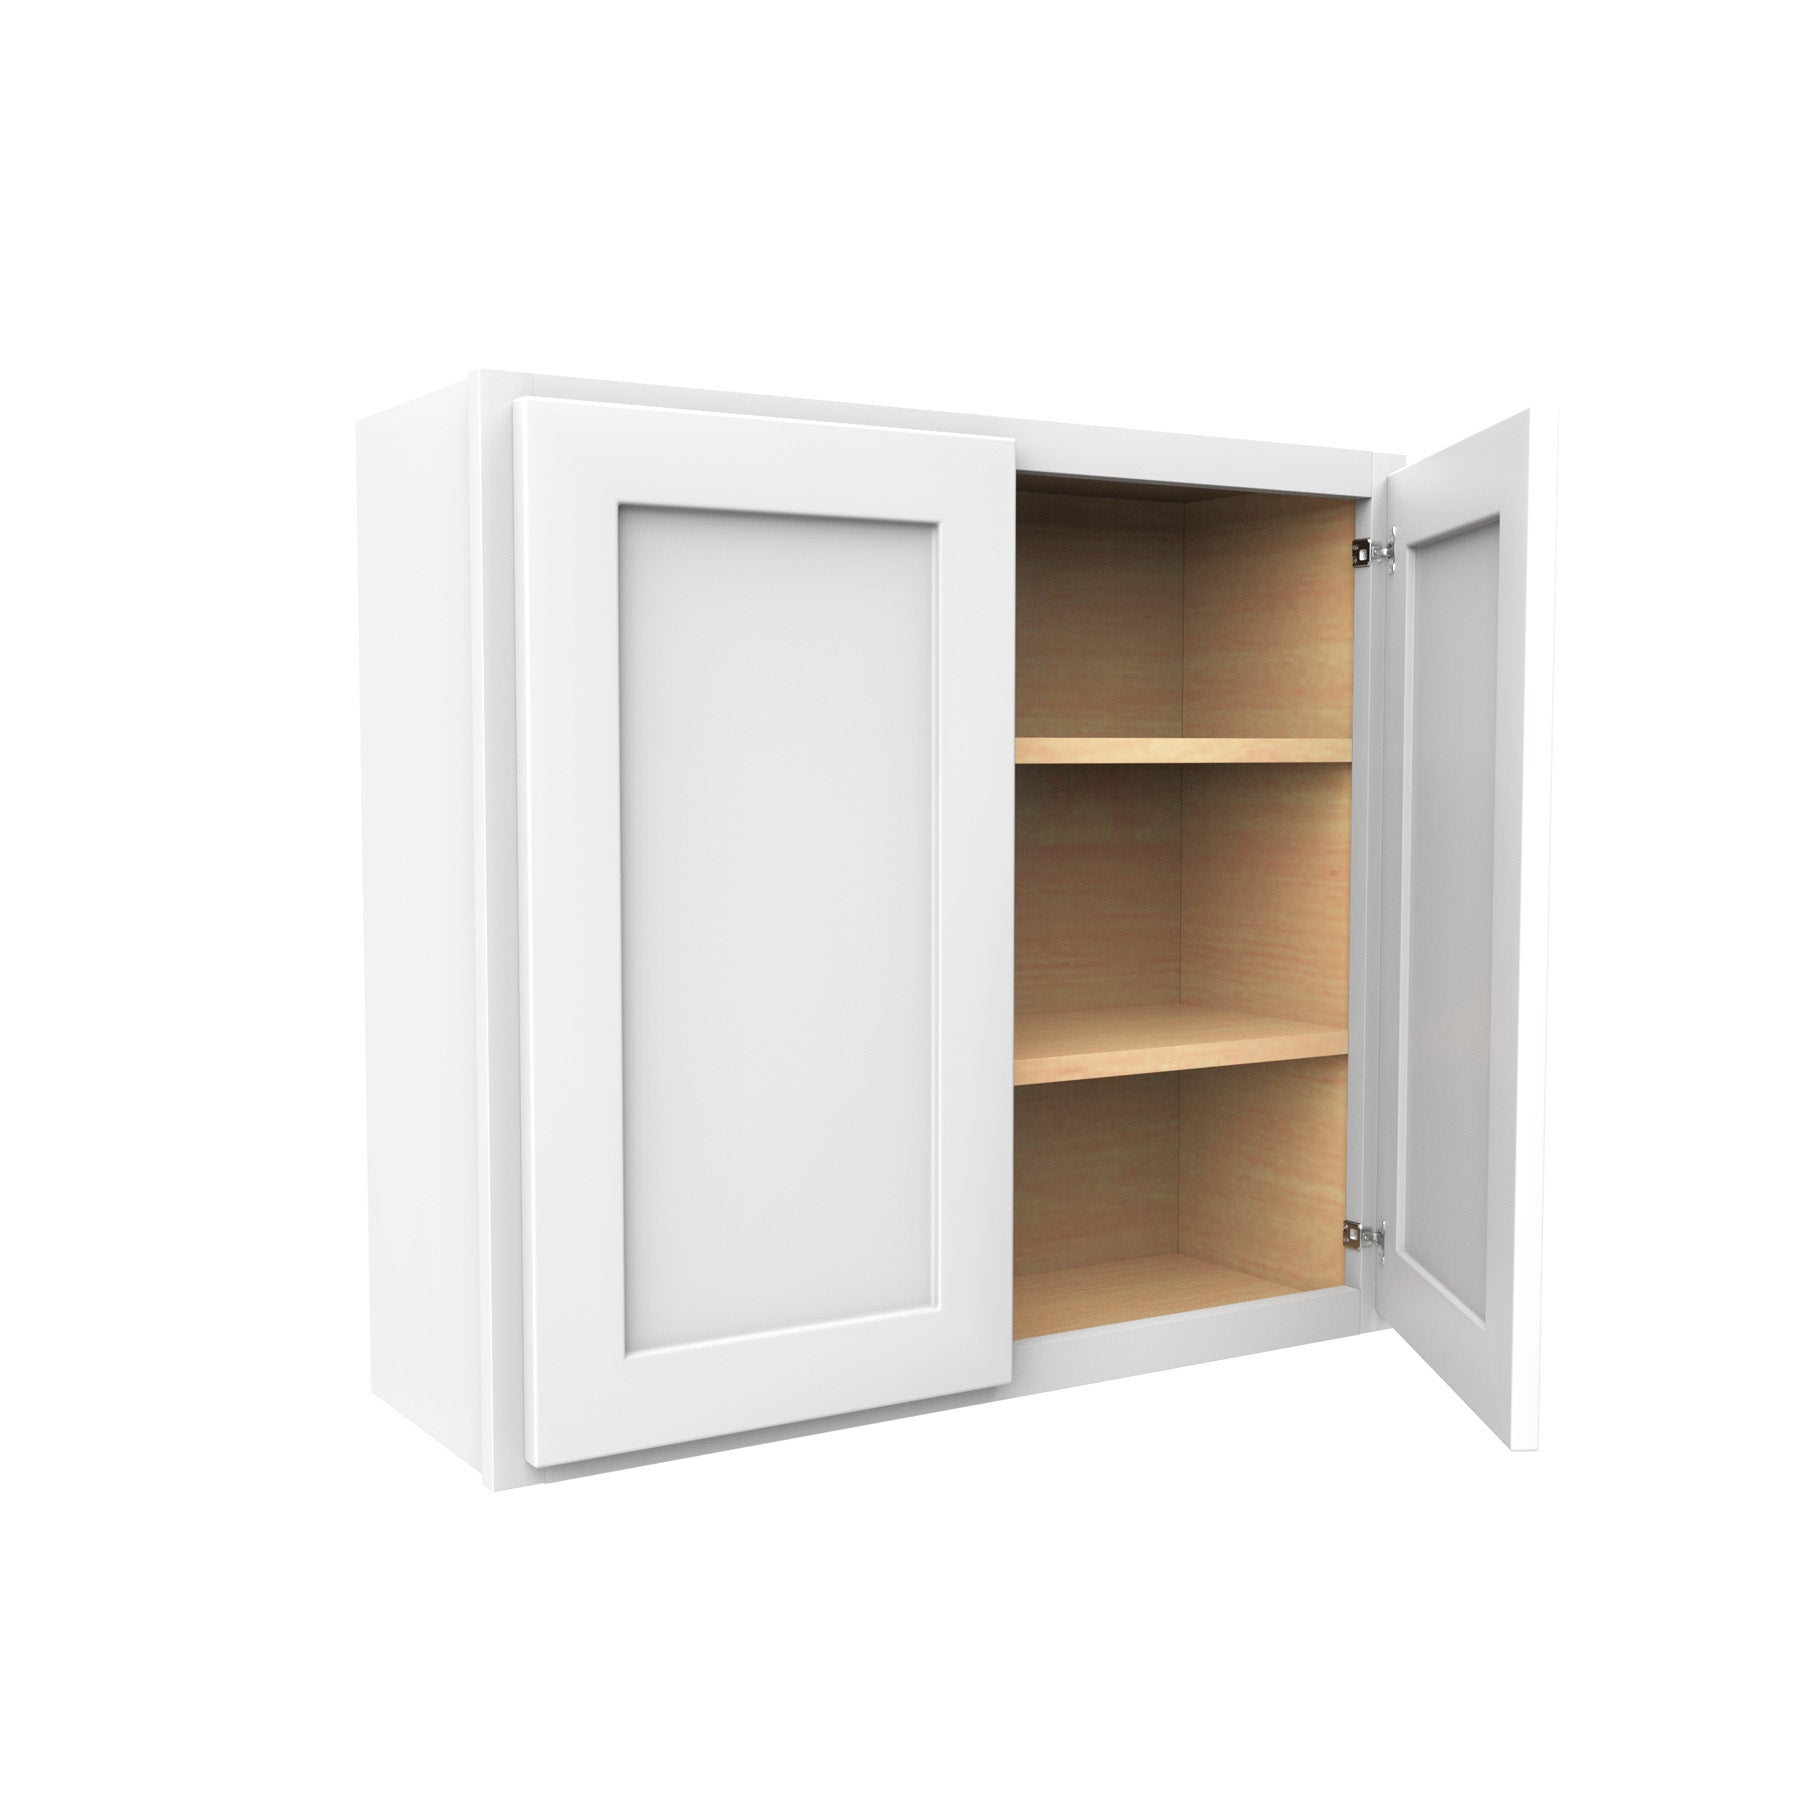 Luxor White - Double Door Wall Cabinet | 33"W x 30"H x 12"D